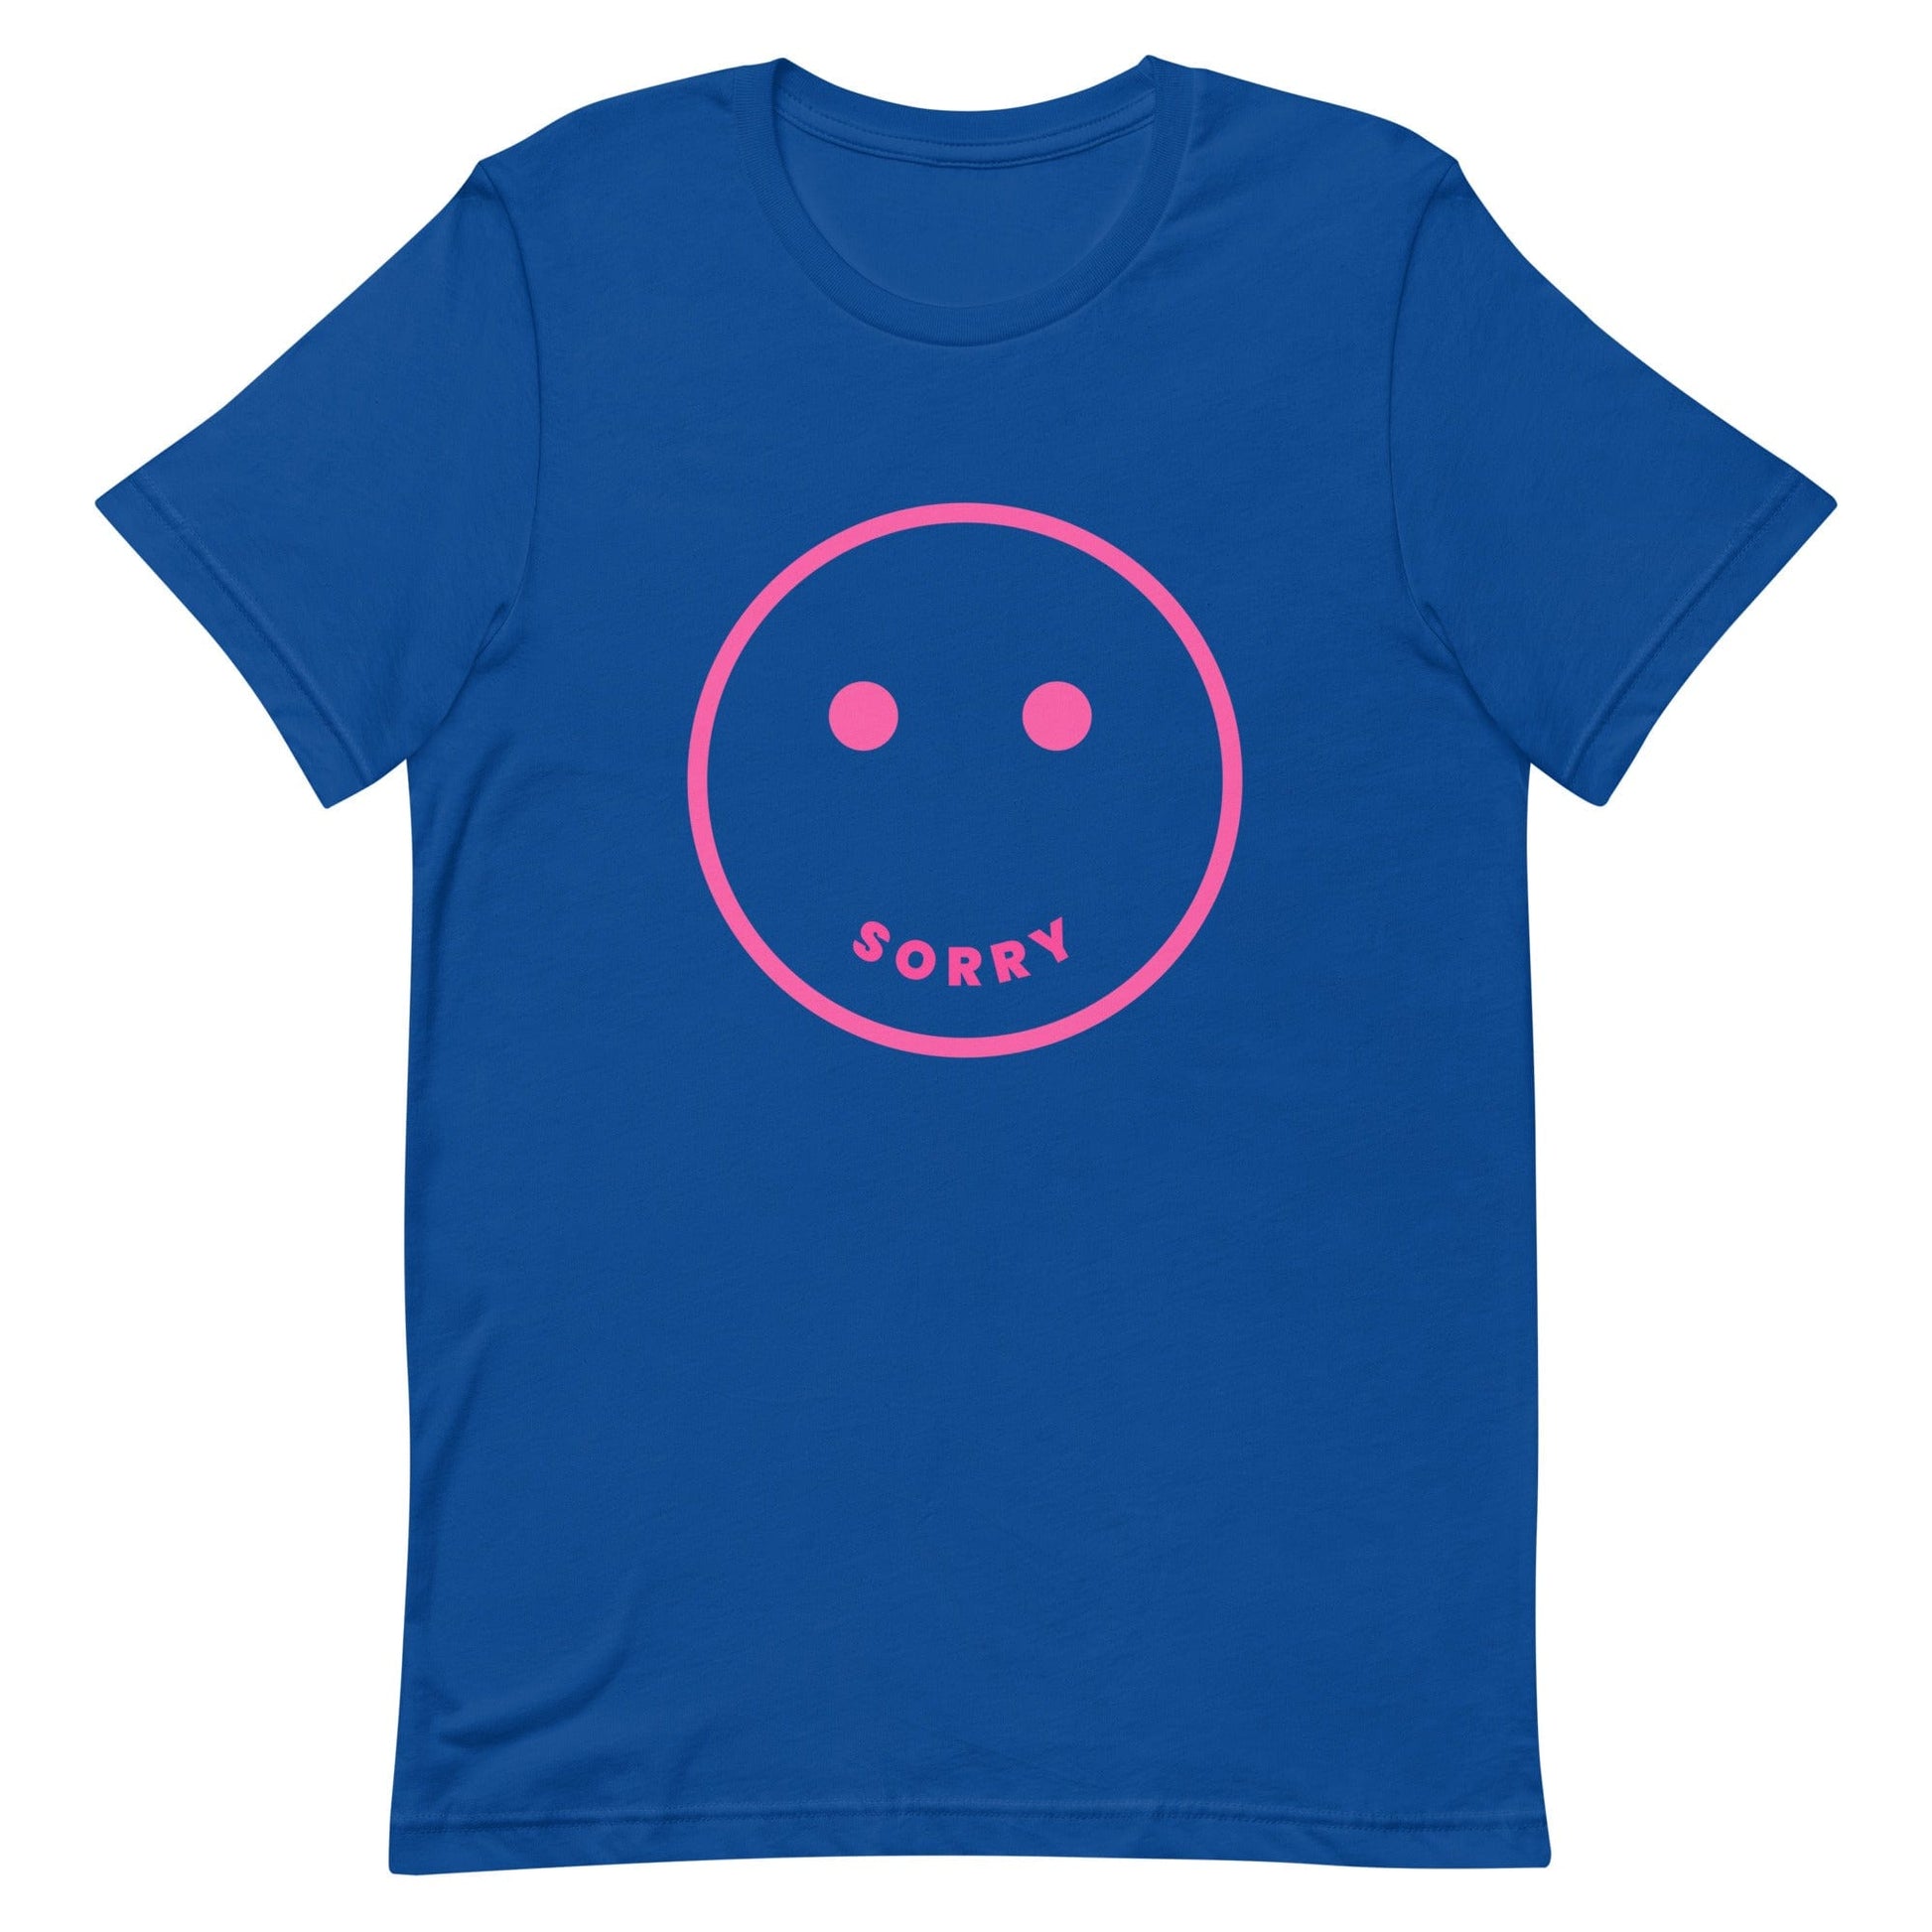 genderless-sorry-not-sorry-tshirt-quote-apparel-blue-and-fucsia-at-feminist-define